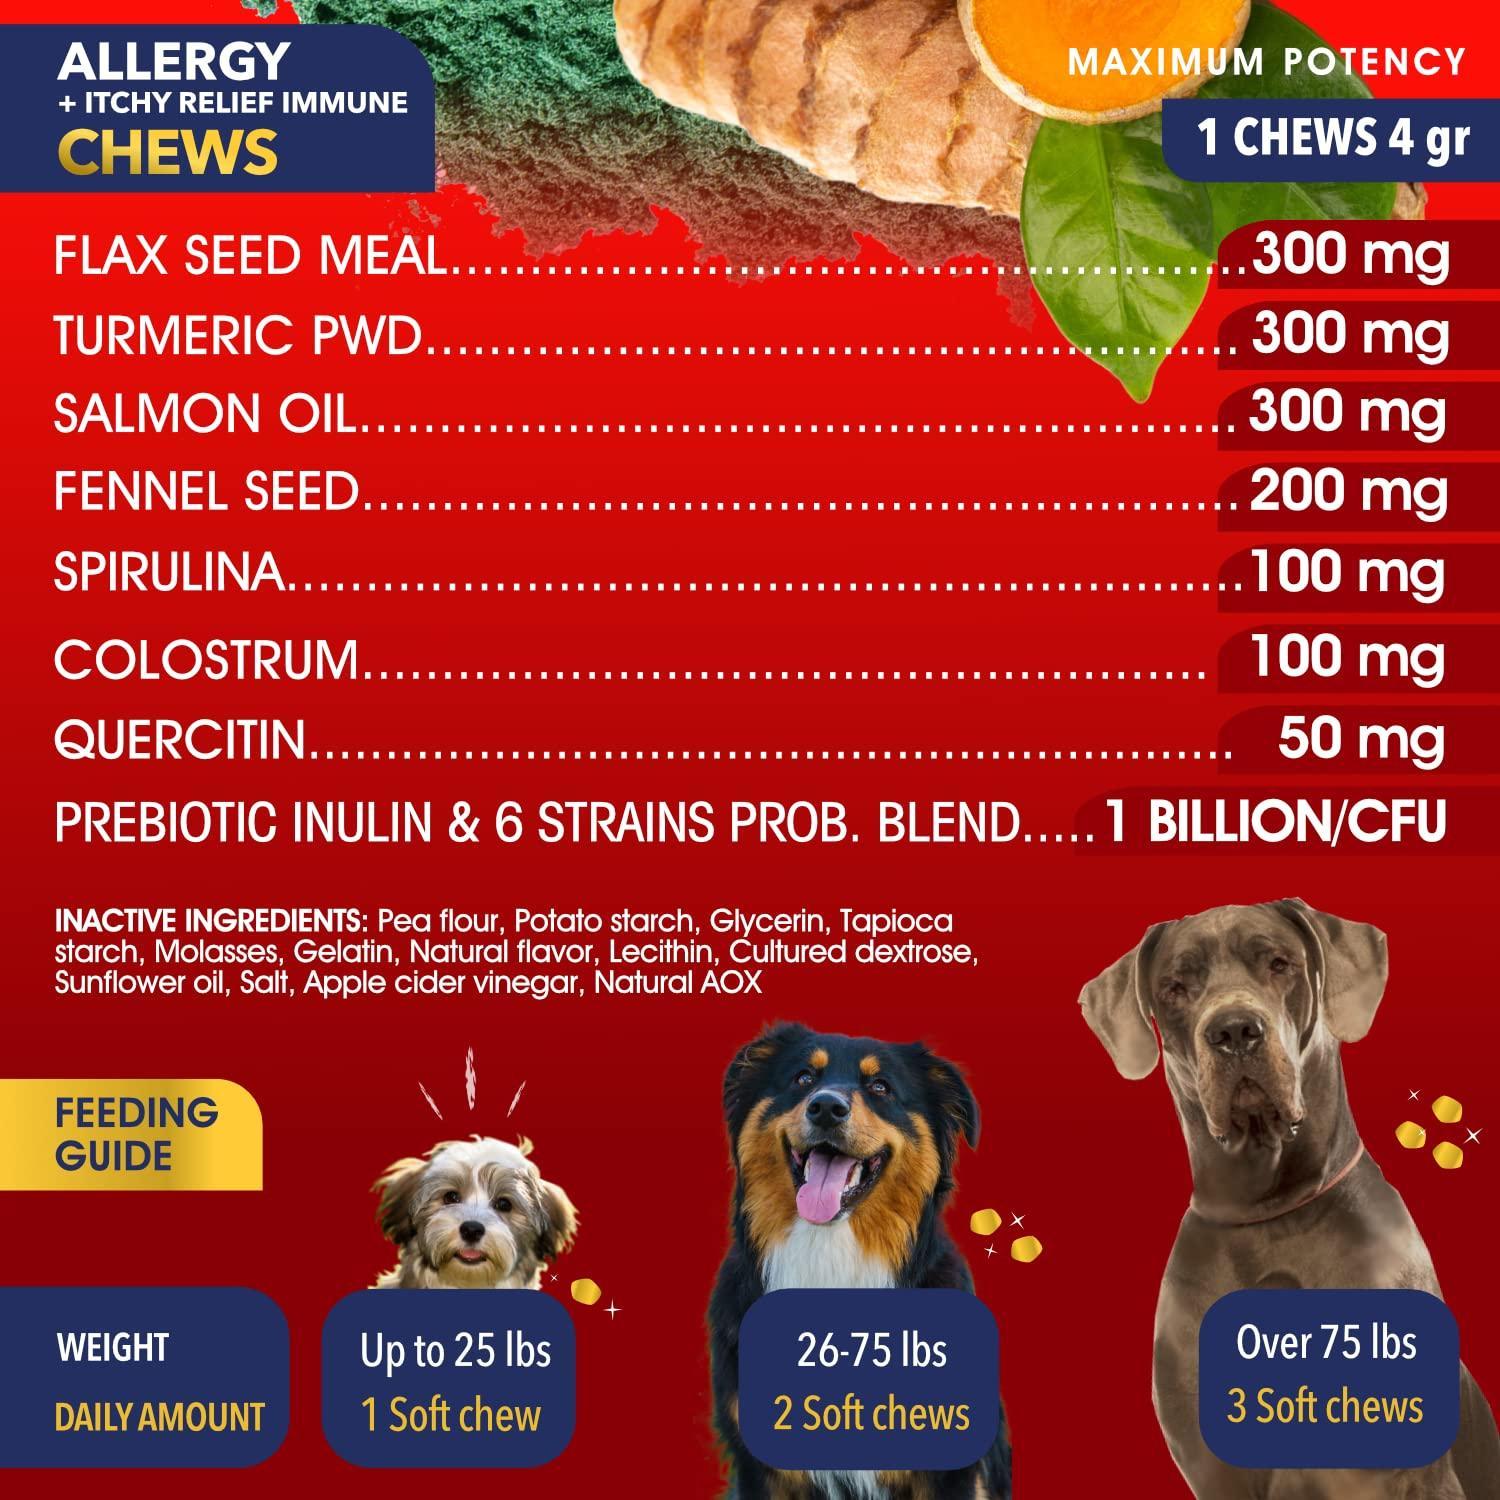 YUMA'S Dog Allergy Chews   Itch Relief for Dogs   Dog Allergy Relief   Anti Itch for Dogs   Dog Itchy Skin   Dog Allergy Support   Hot Spots   Immune Health Supplement   Made in USA